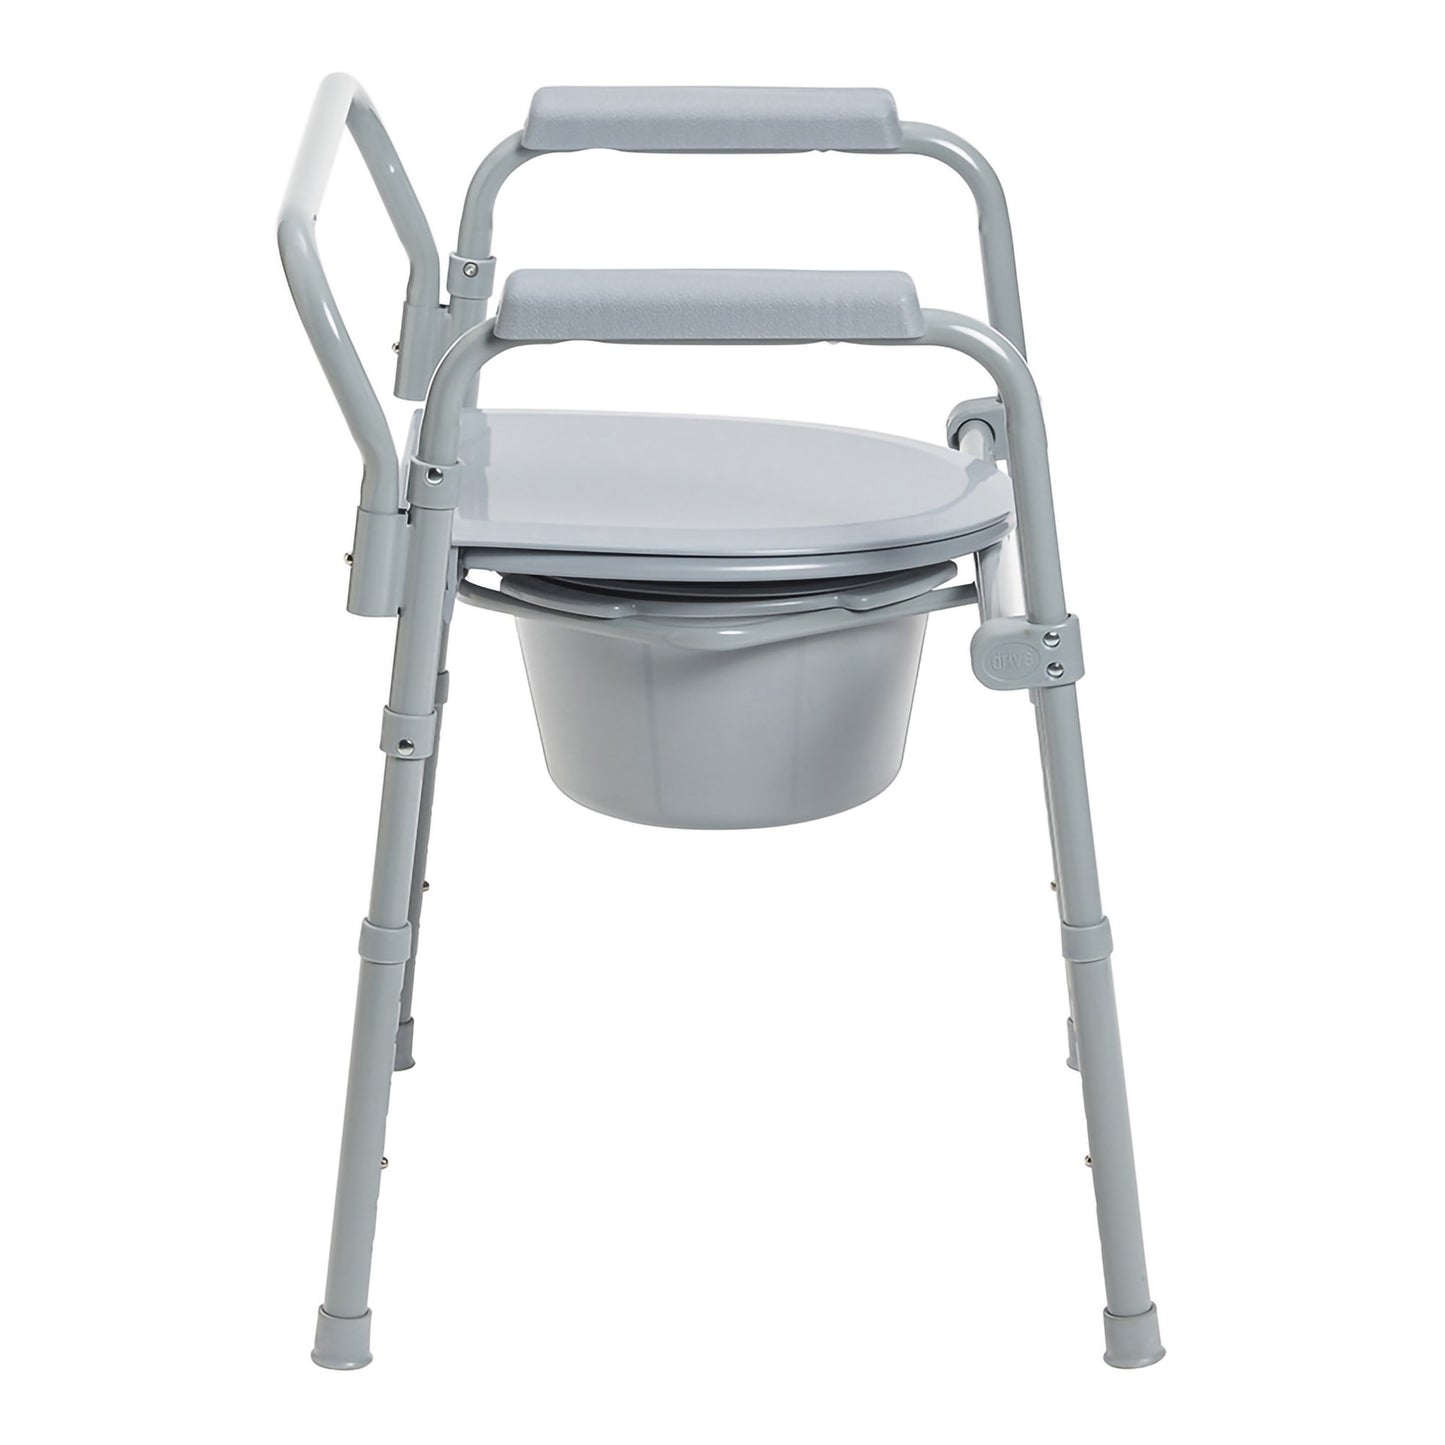 McKesson Folding Fixed Arm Steel Commode Chair